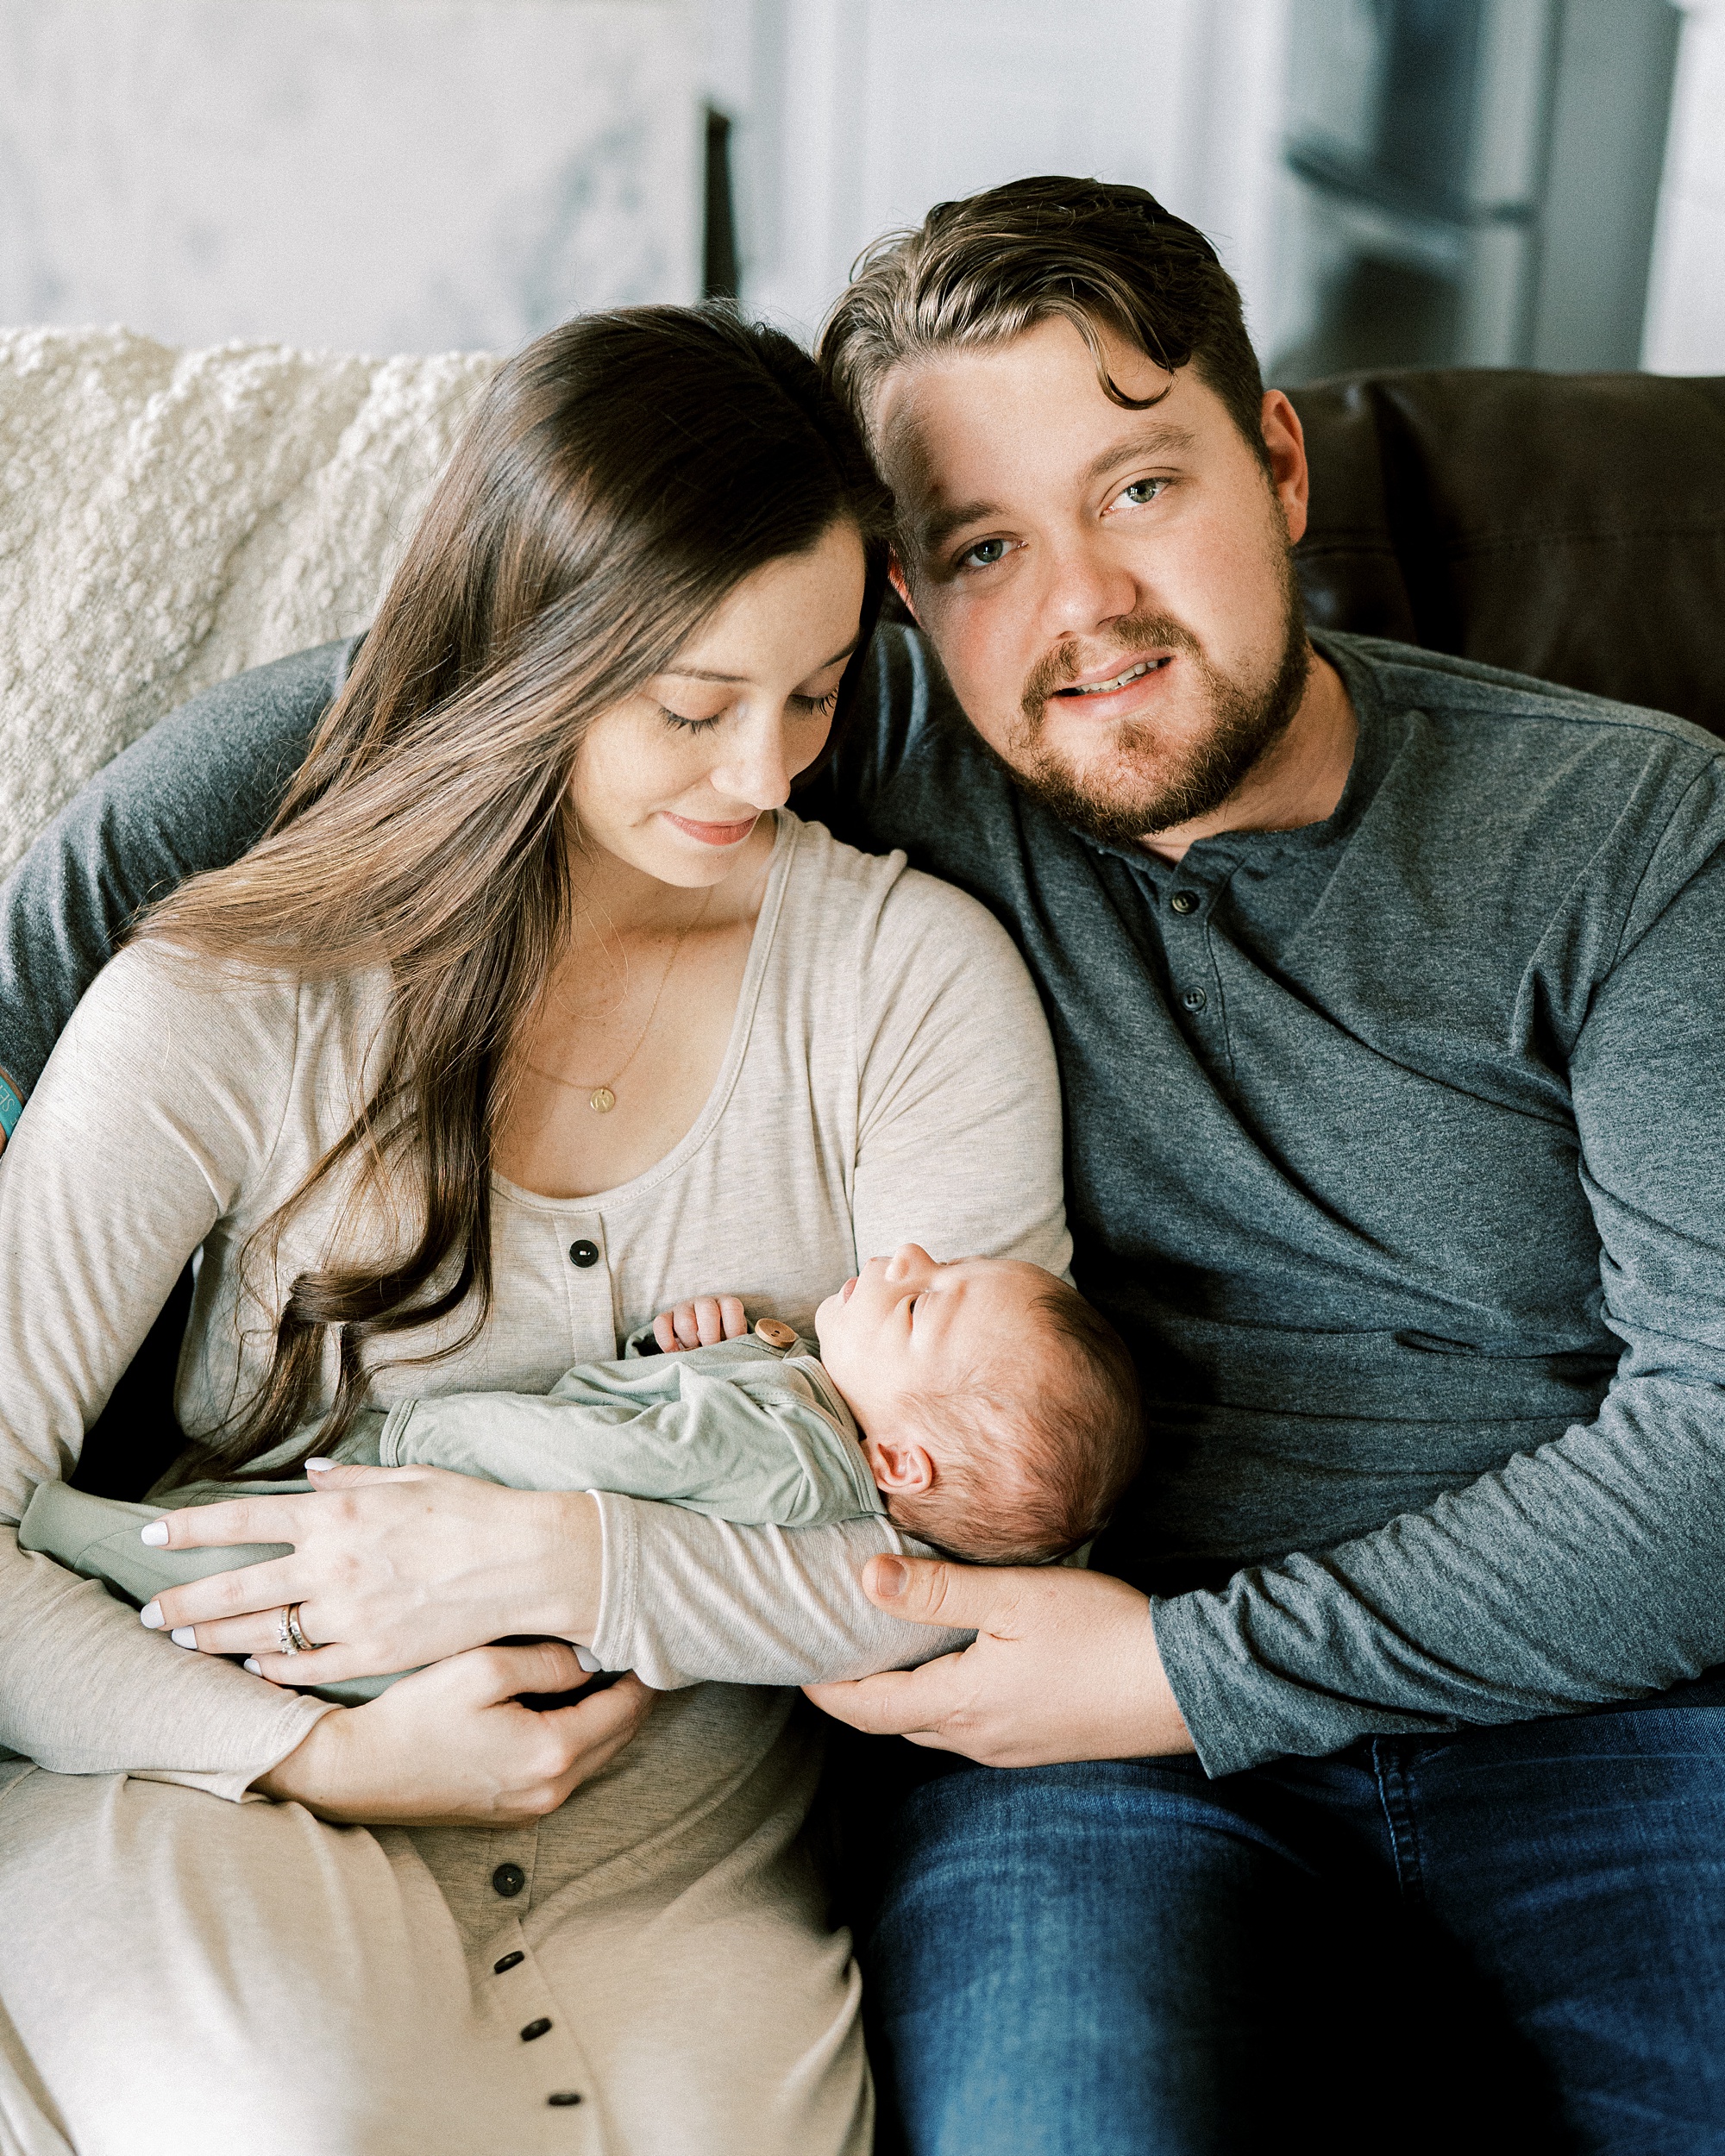 dad holds mom and newborn baby boy during TN In Home Lifestyle Newborn photos